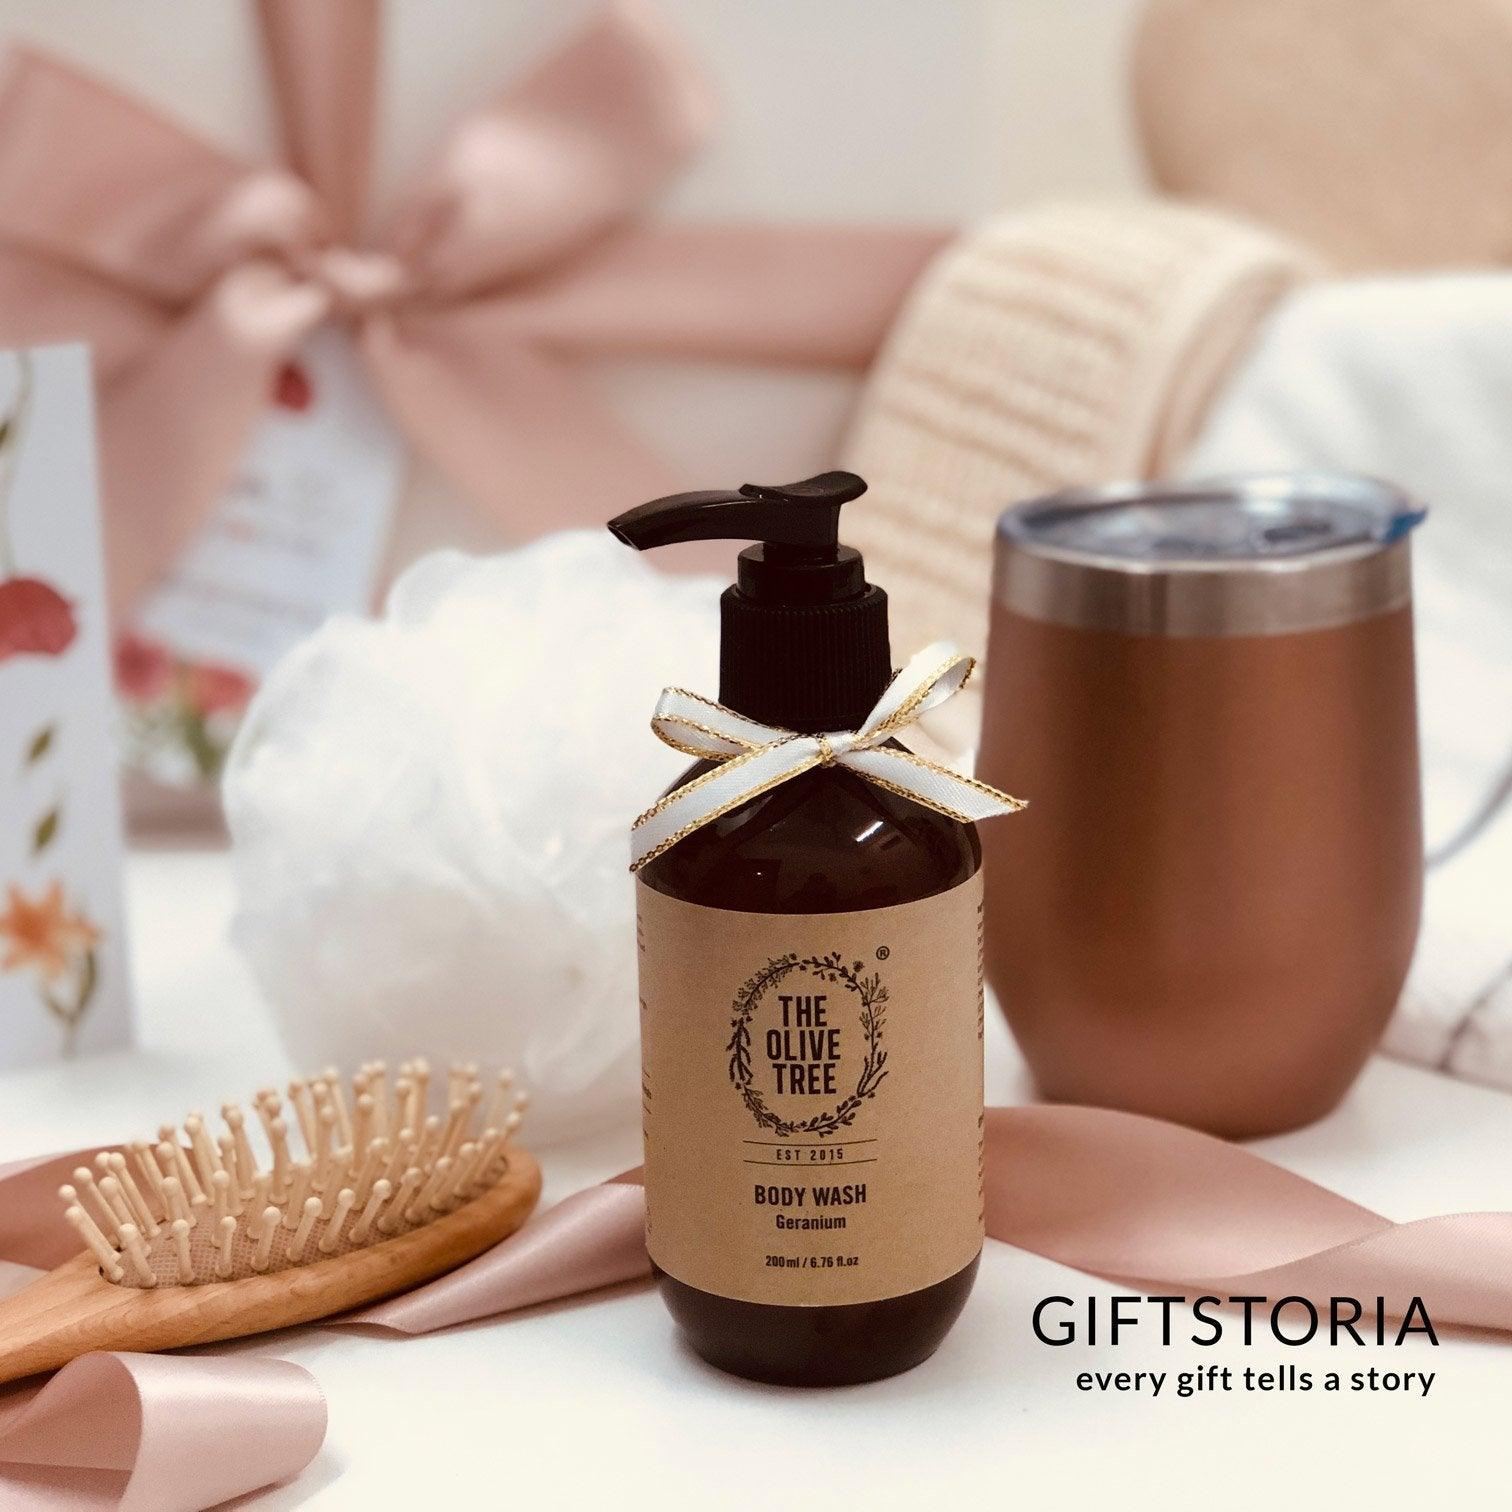 Chill and Unwind Gift Box - Mother's Day (Delivery starts 26th April) - GiftStoria.com